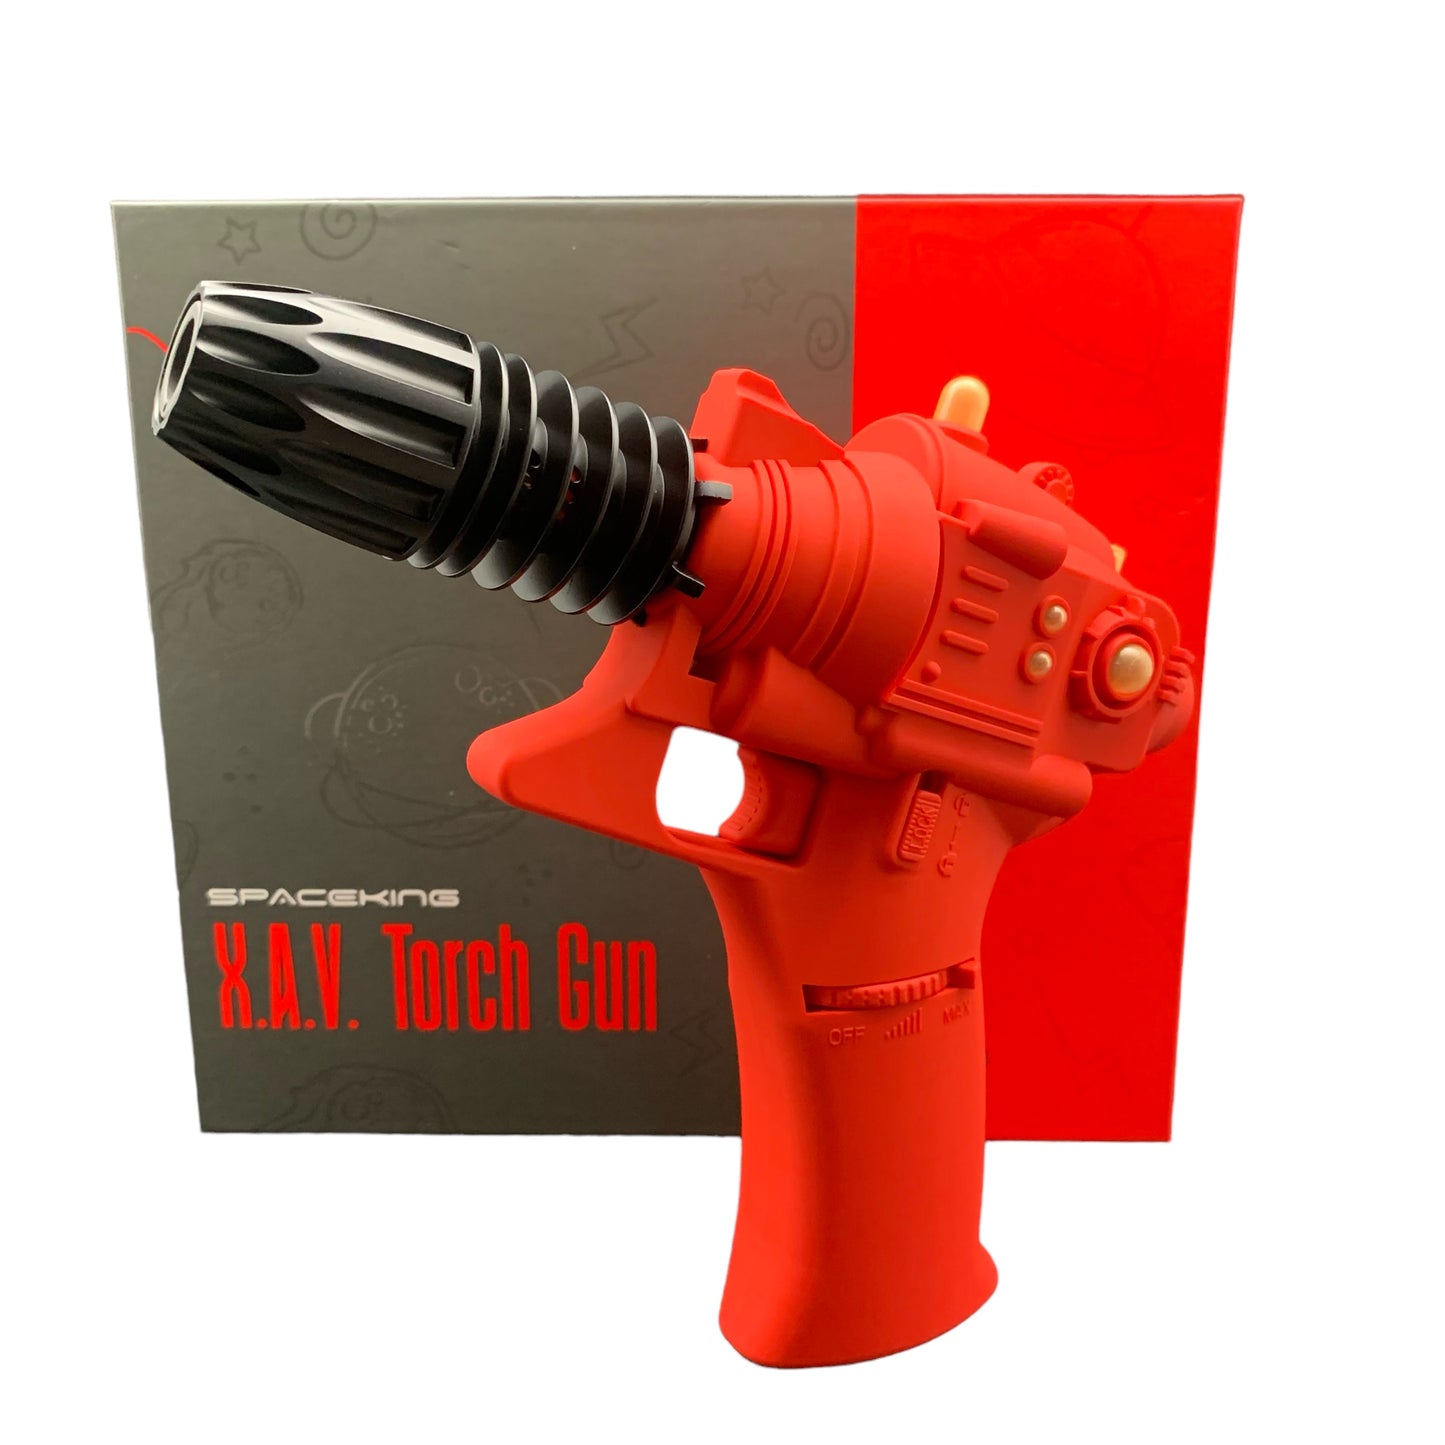 Space King X.A.V. Torch Gun (Color Options Available) (B2B)